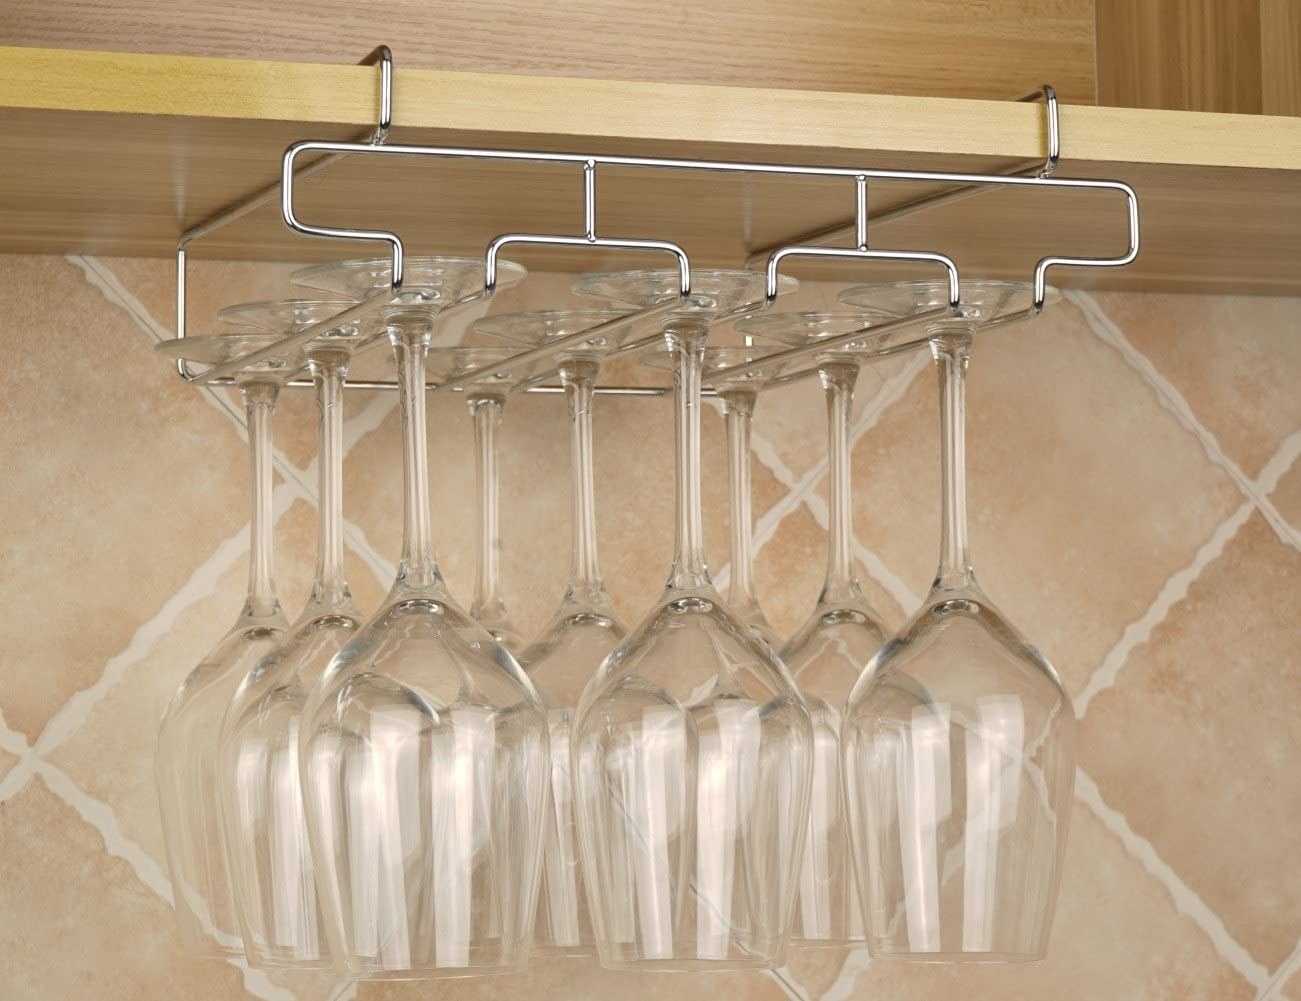 under-cabinet wine glass holder with throw rows and enough for nine glasses